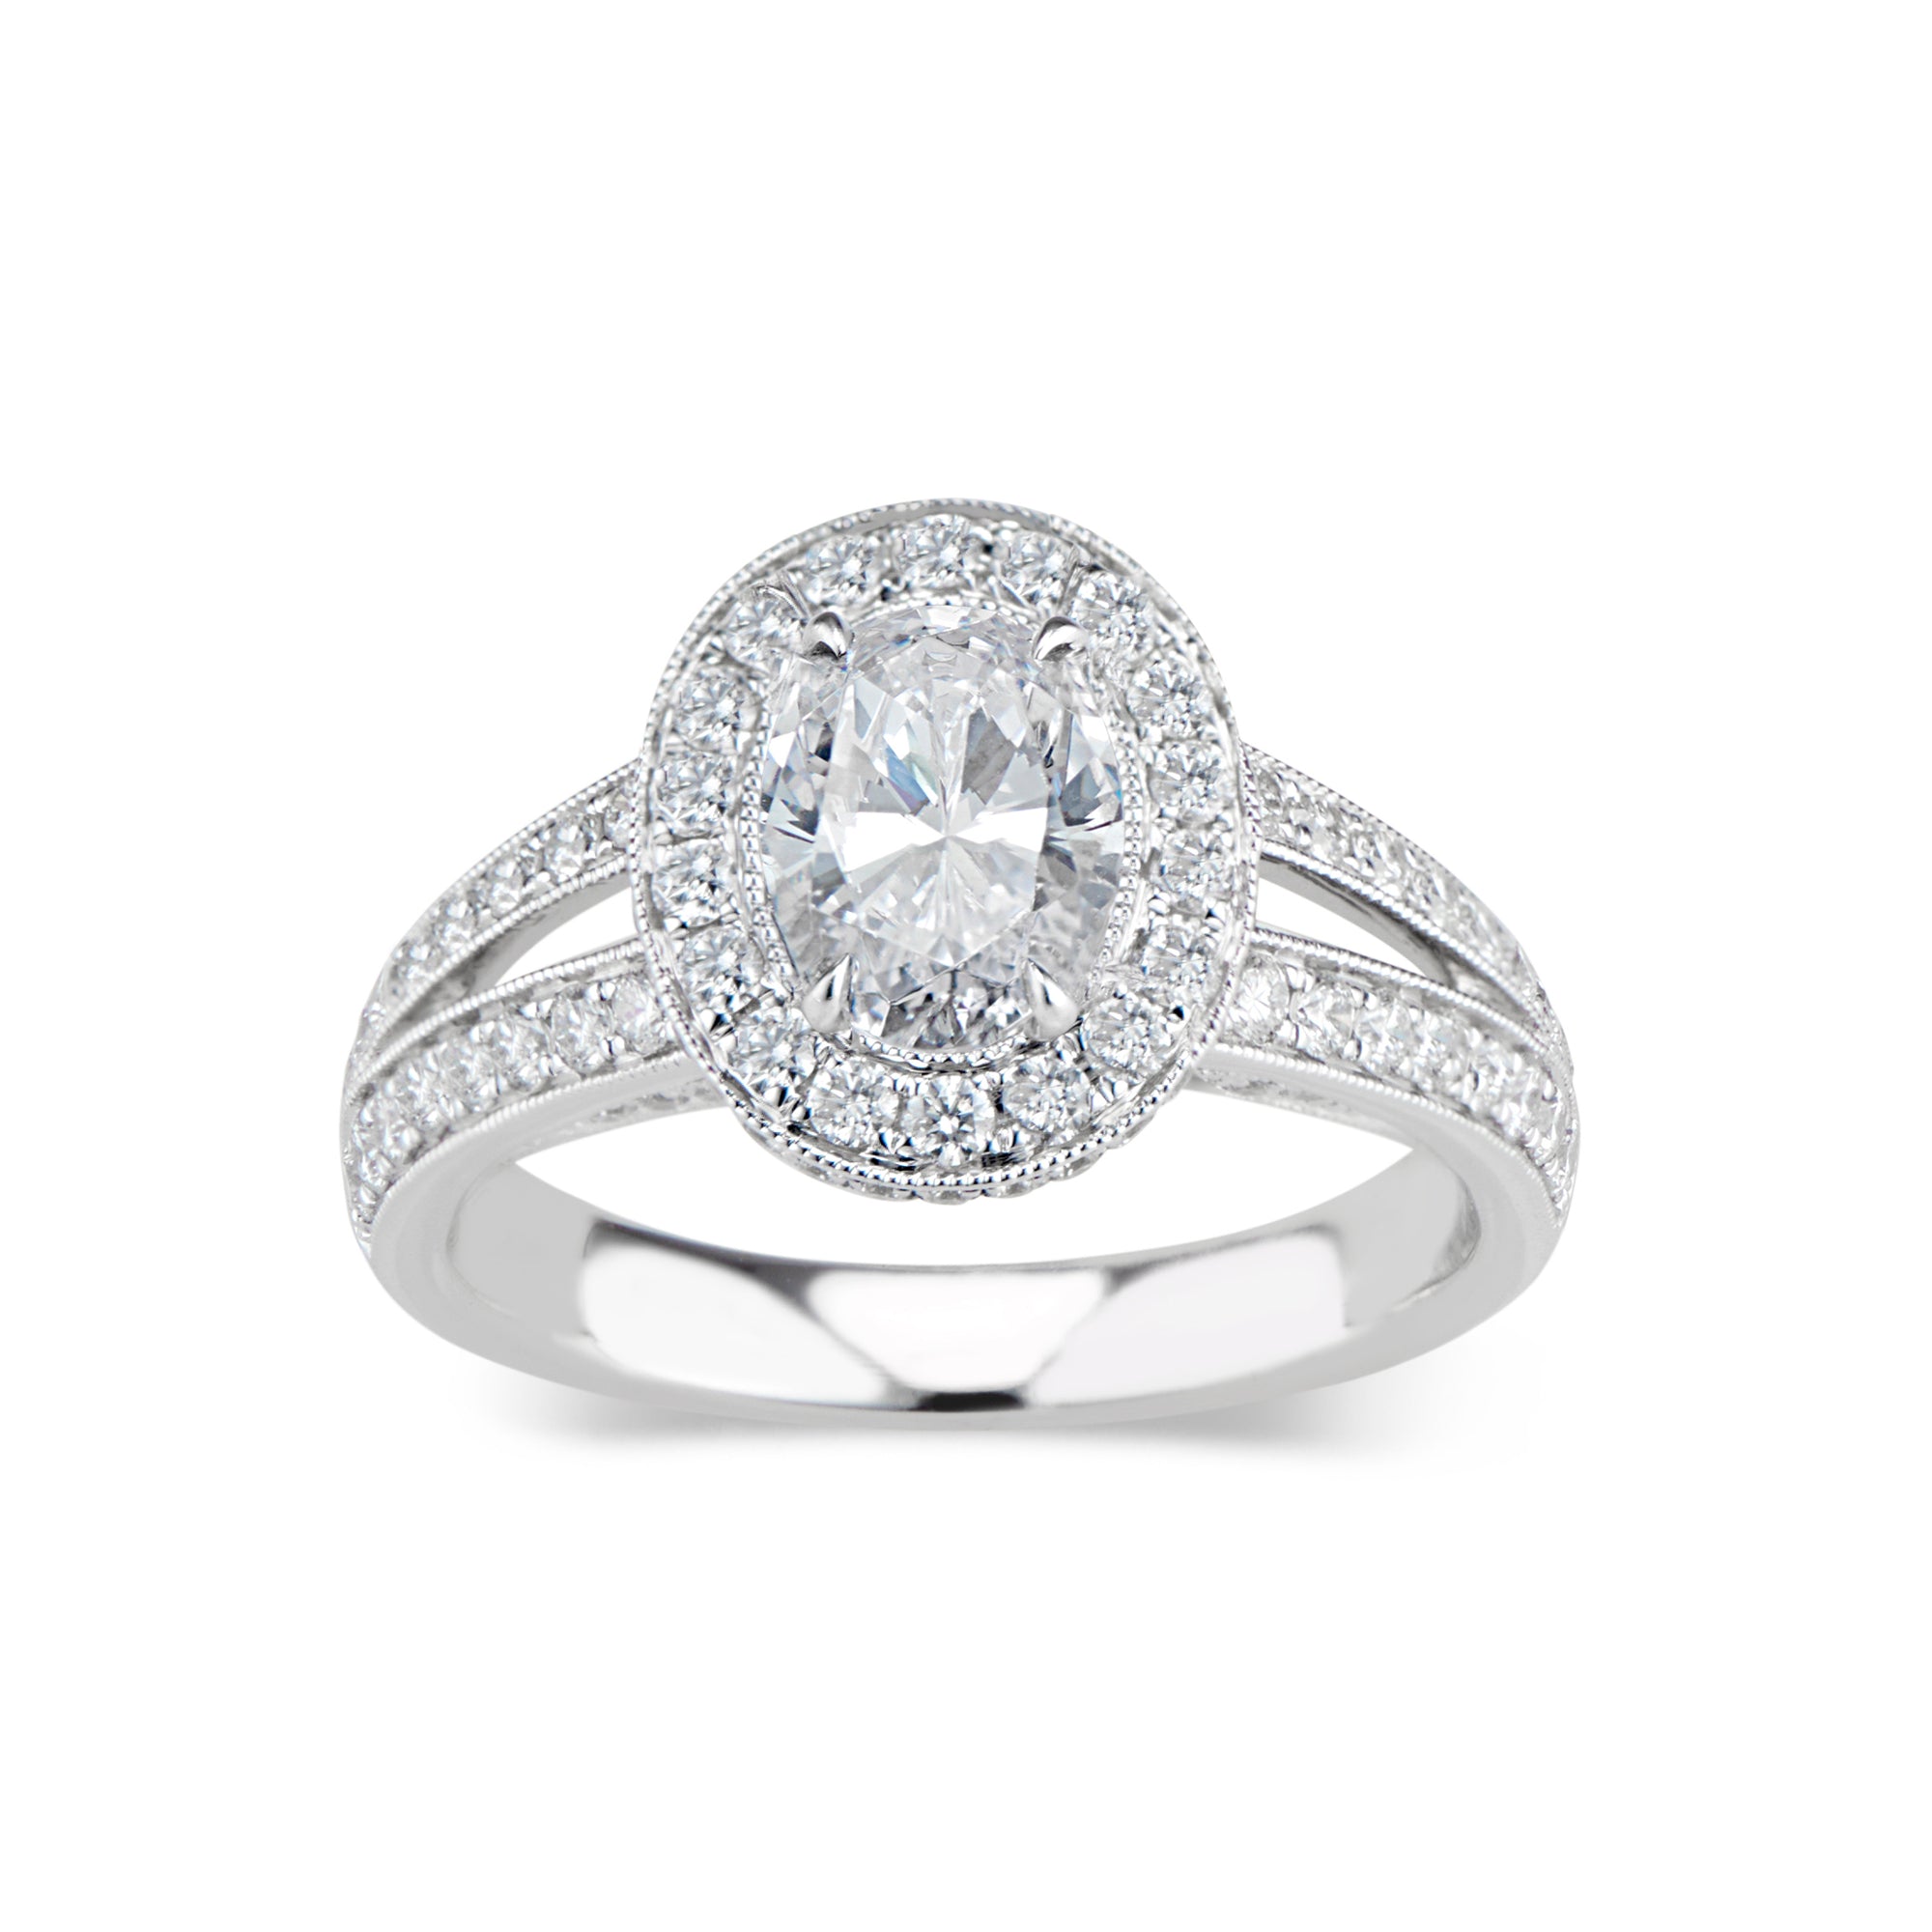 Oval Halo Diamond Engagement Ring with Split Shank - 18K weighting 6.08 GR - 112 round diamonds totaling 0.90 carats